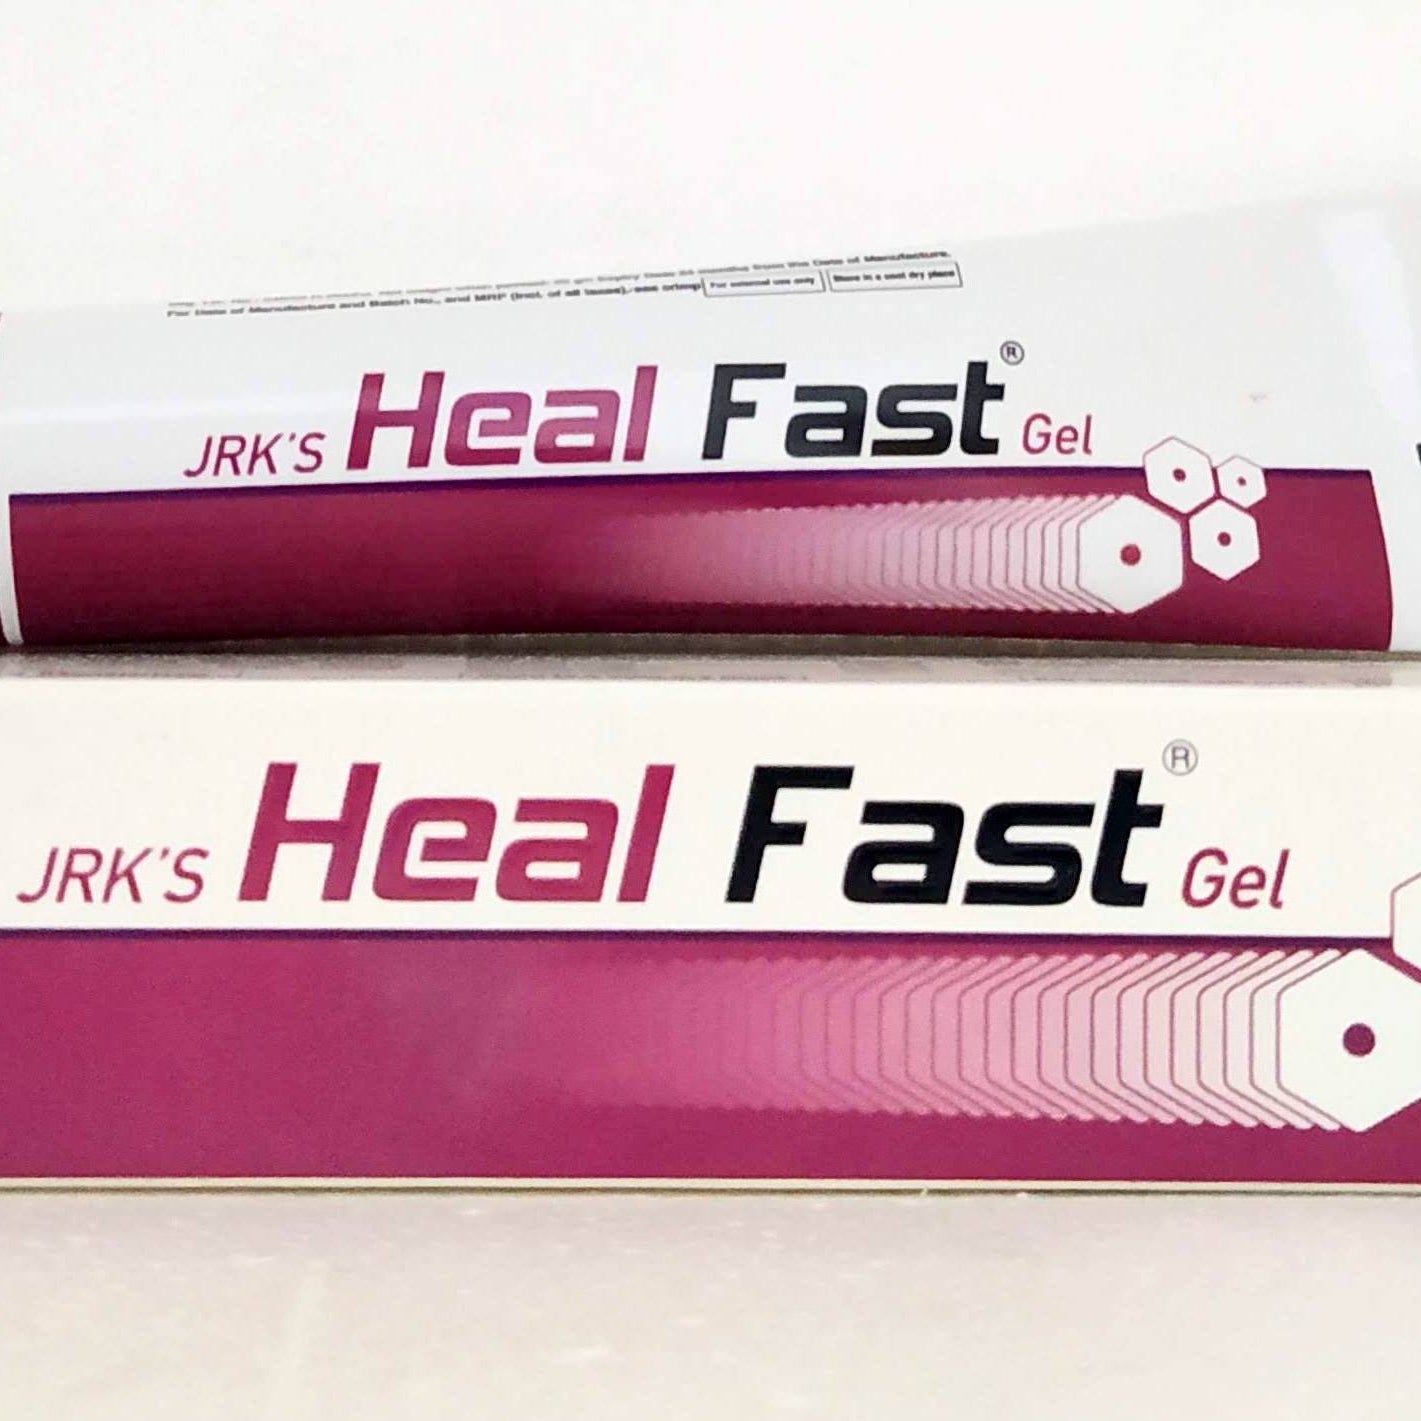 Shop Healfast gel 25gm at price 130.00 from Dr.JRK Online - Ayush Care